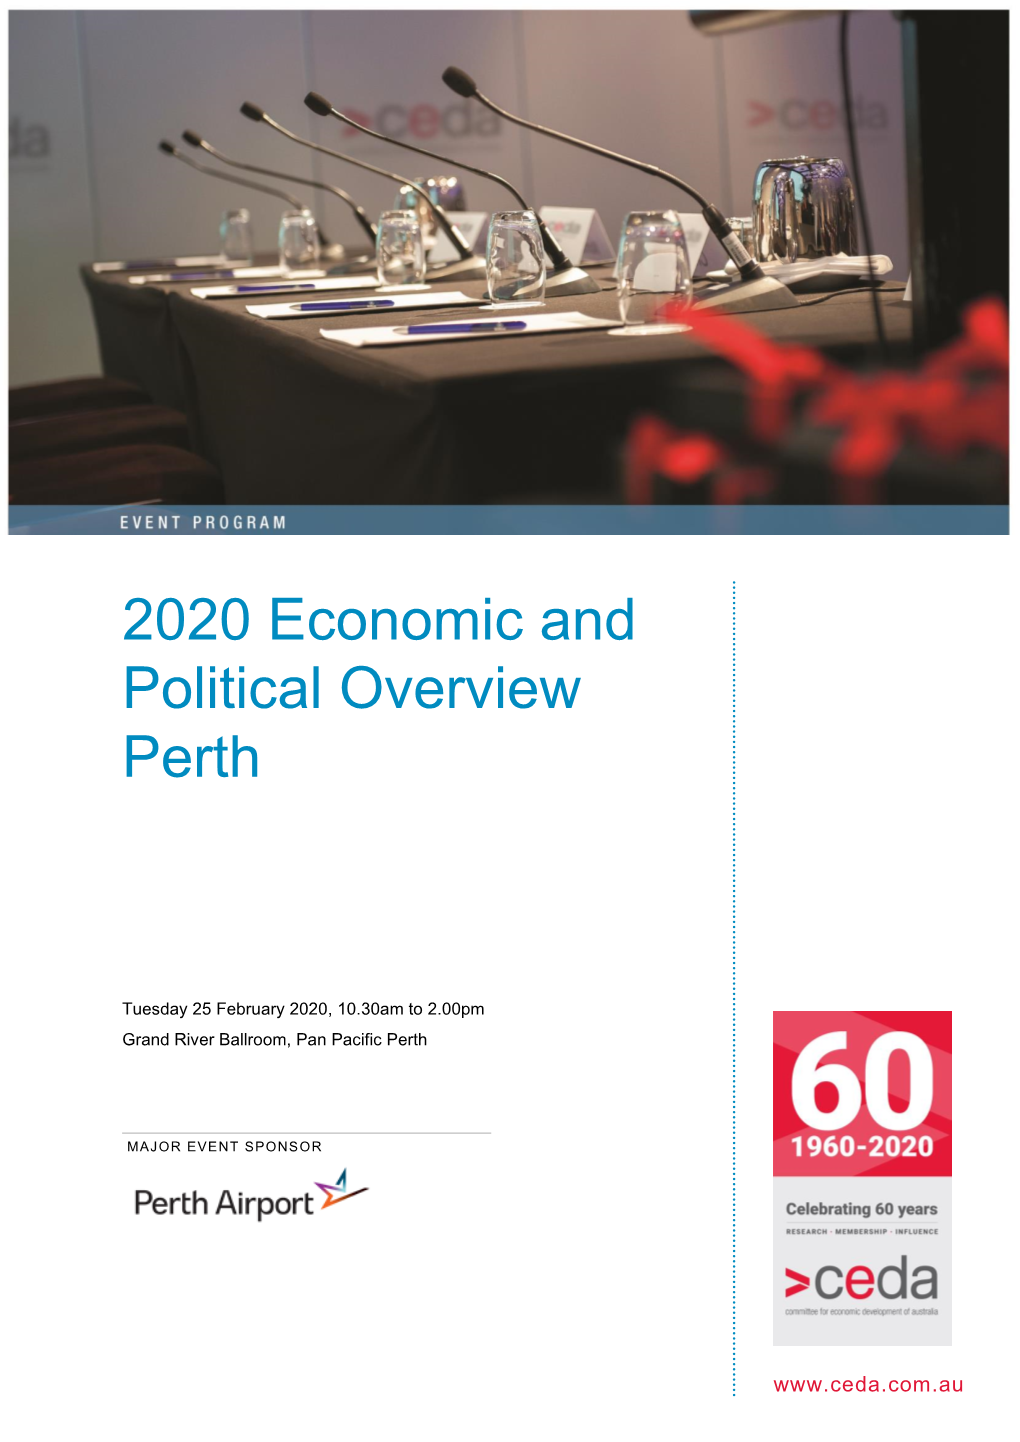 2020 Economic and Political Overview Perth